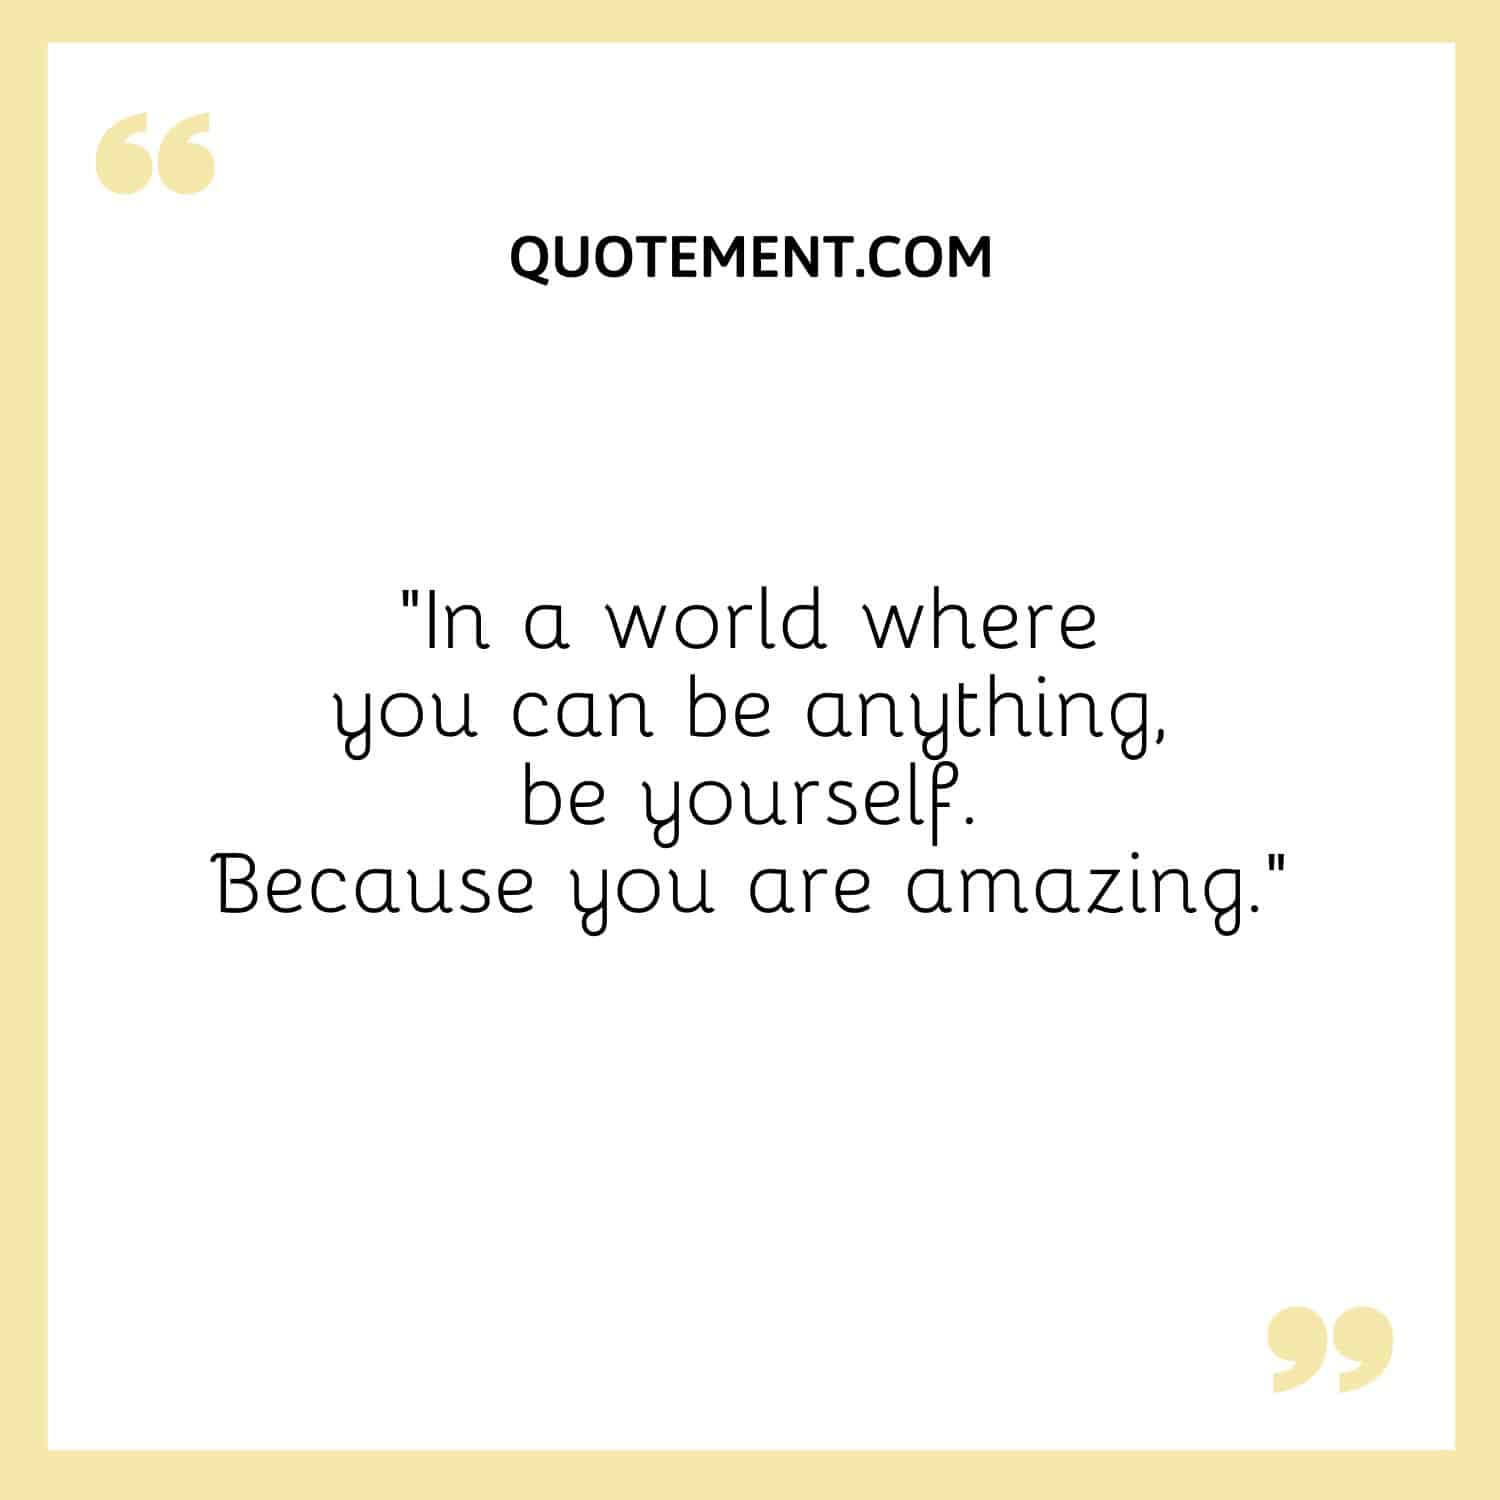 In a world where you can be anything, be yourself. Because you are amazing